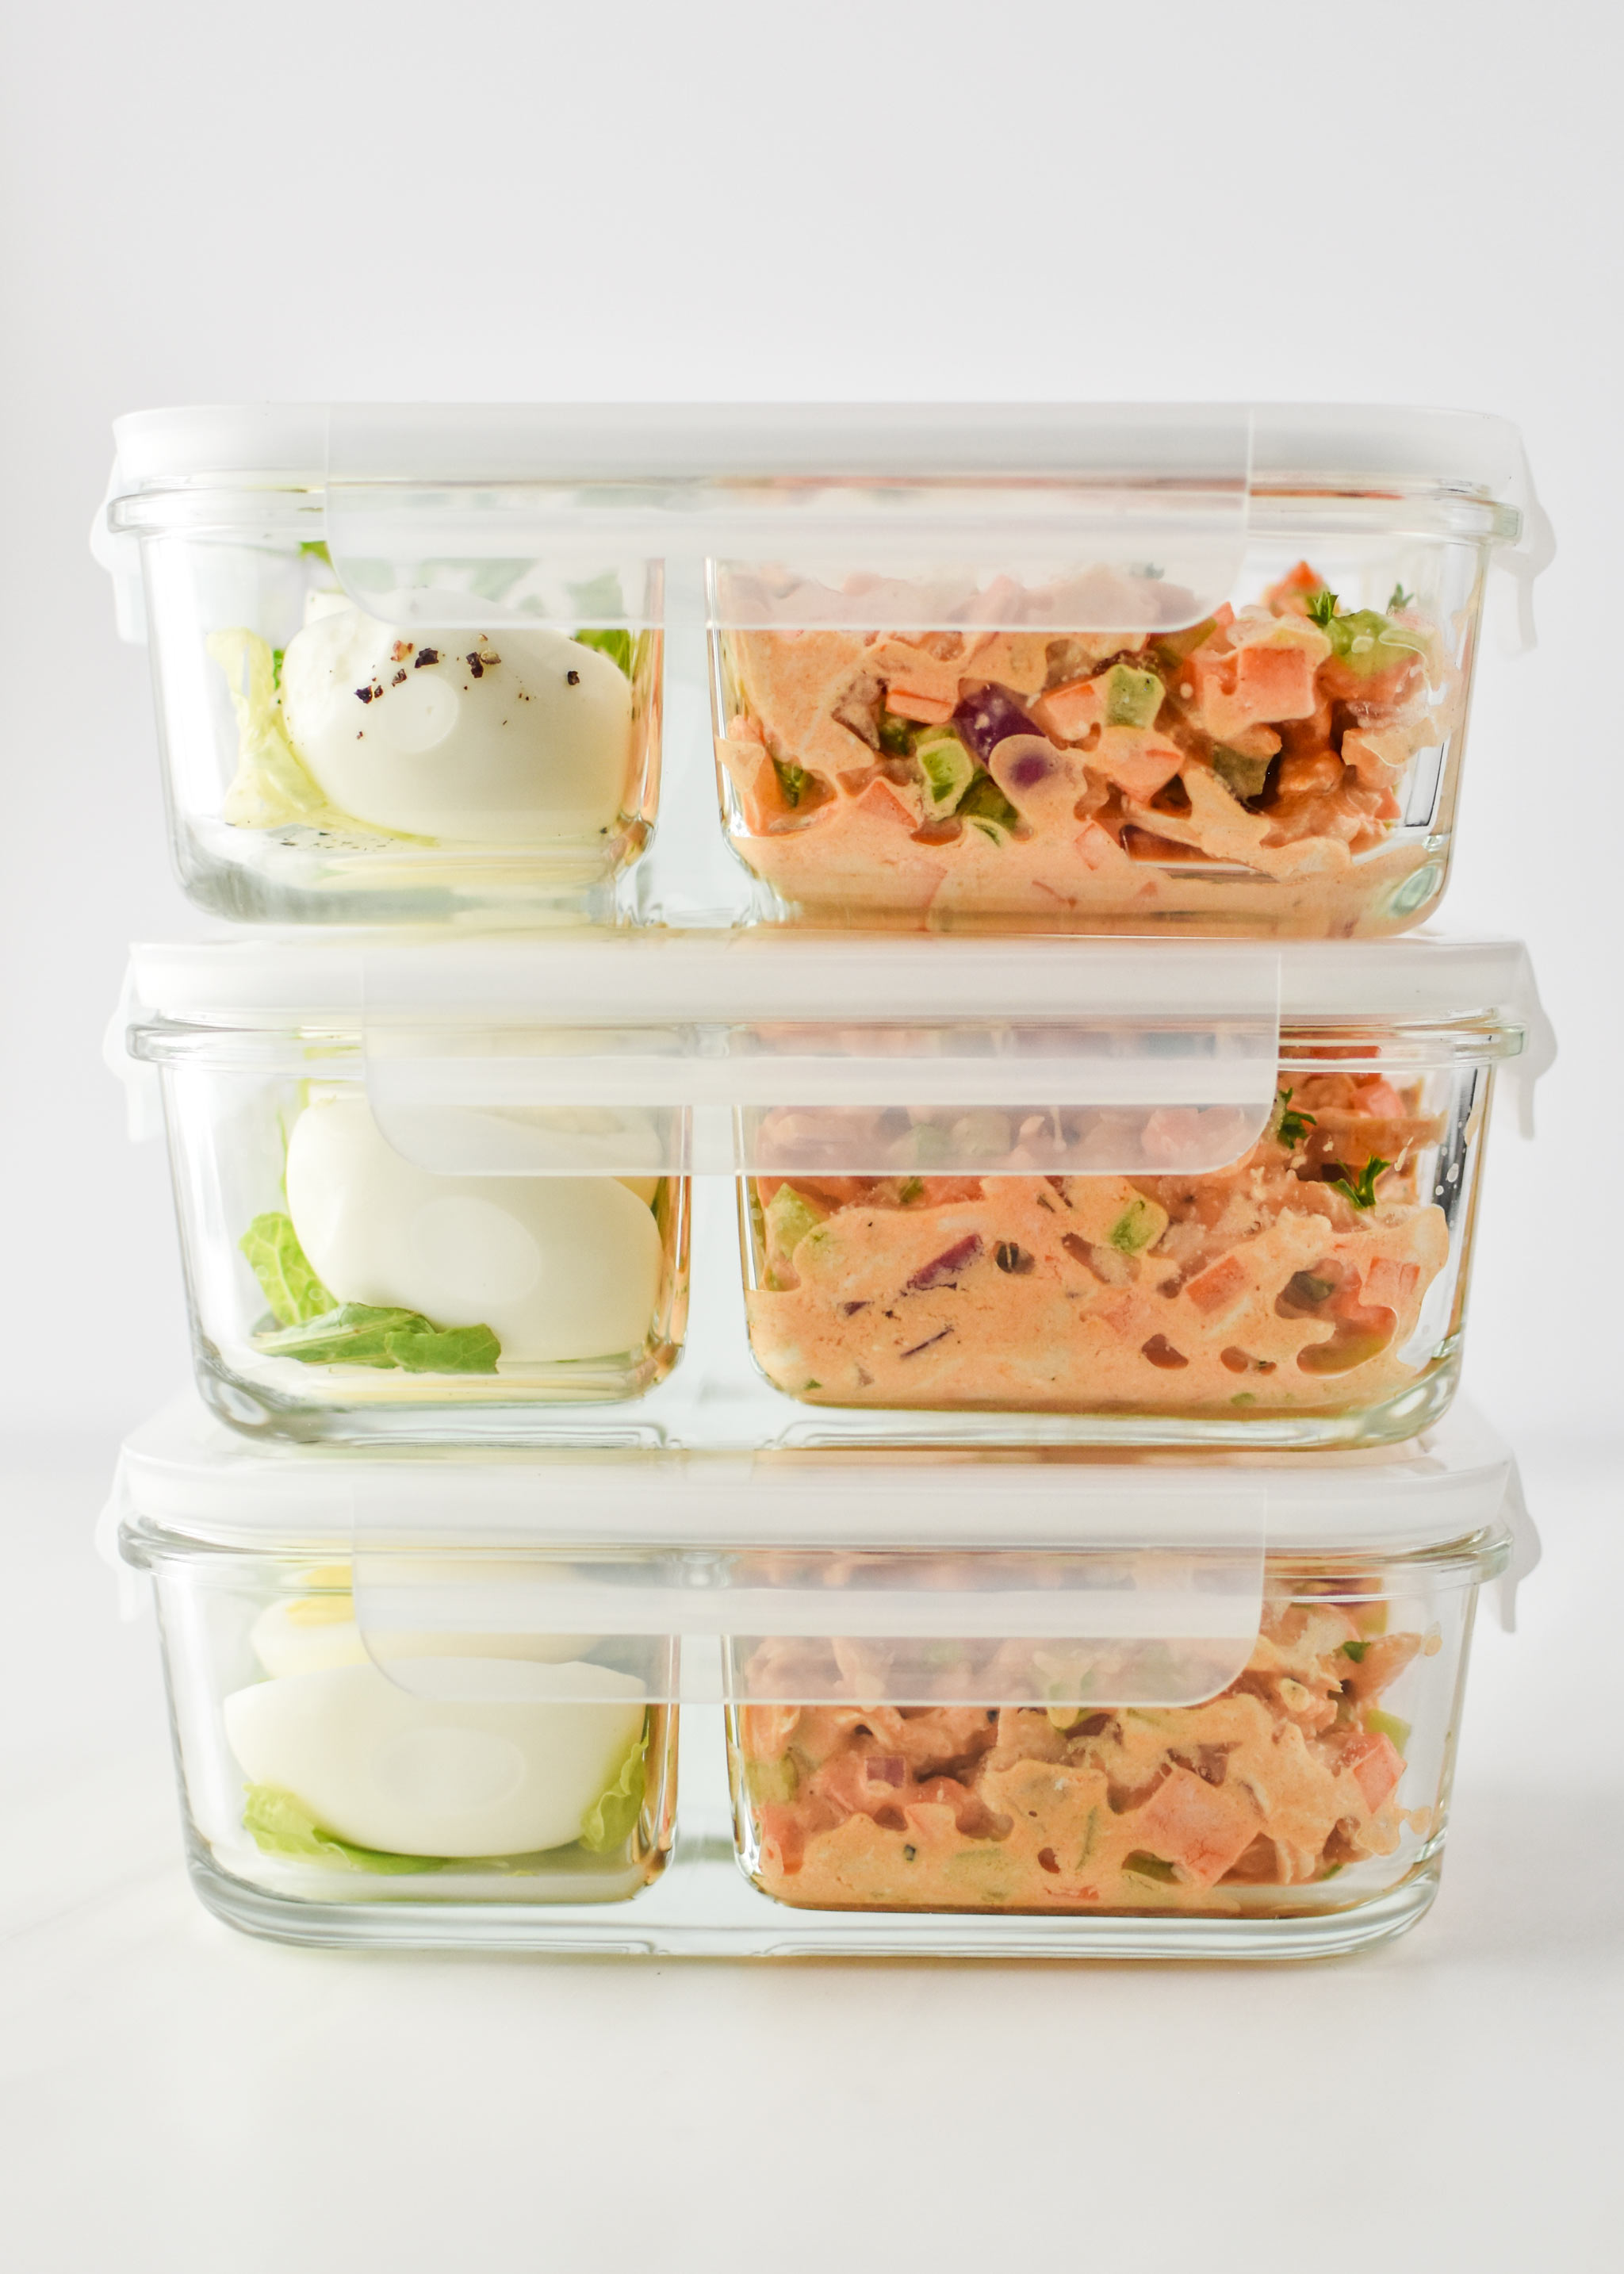 Easy buffalo chicken salad meal prepped into 3 containers